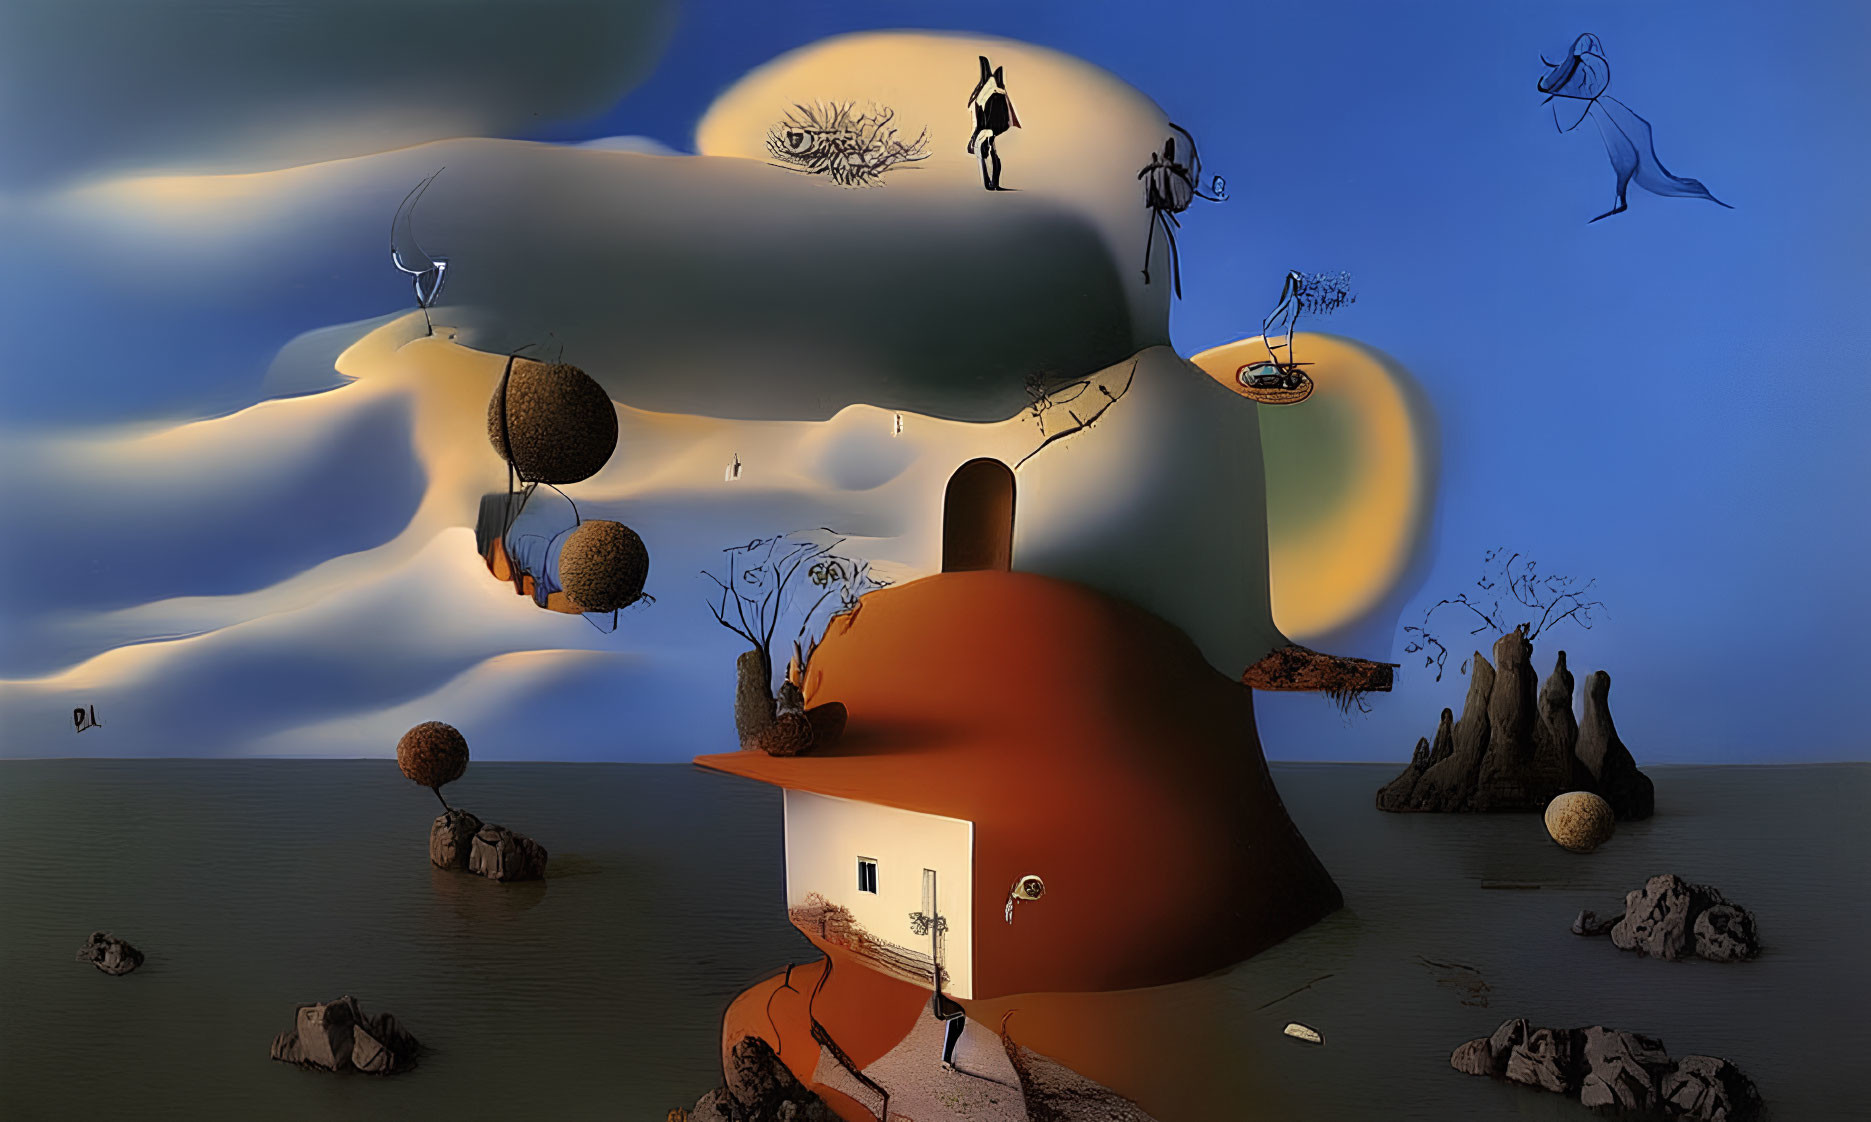 Surreal landscape with floating rocks, trees, violinist, hill-shaped house, and more